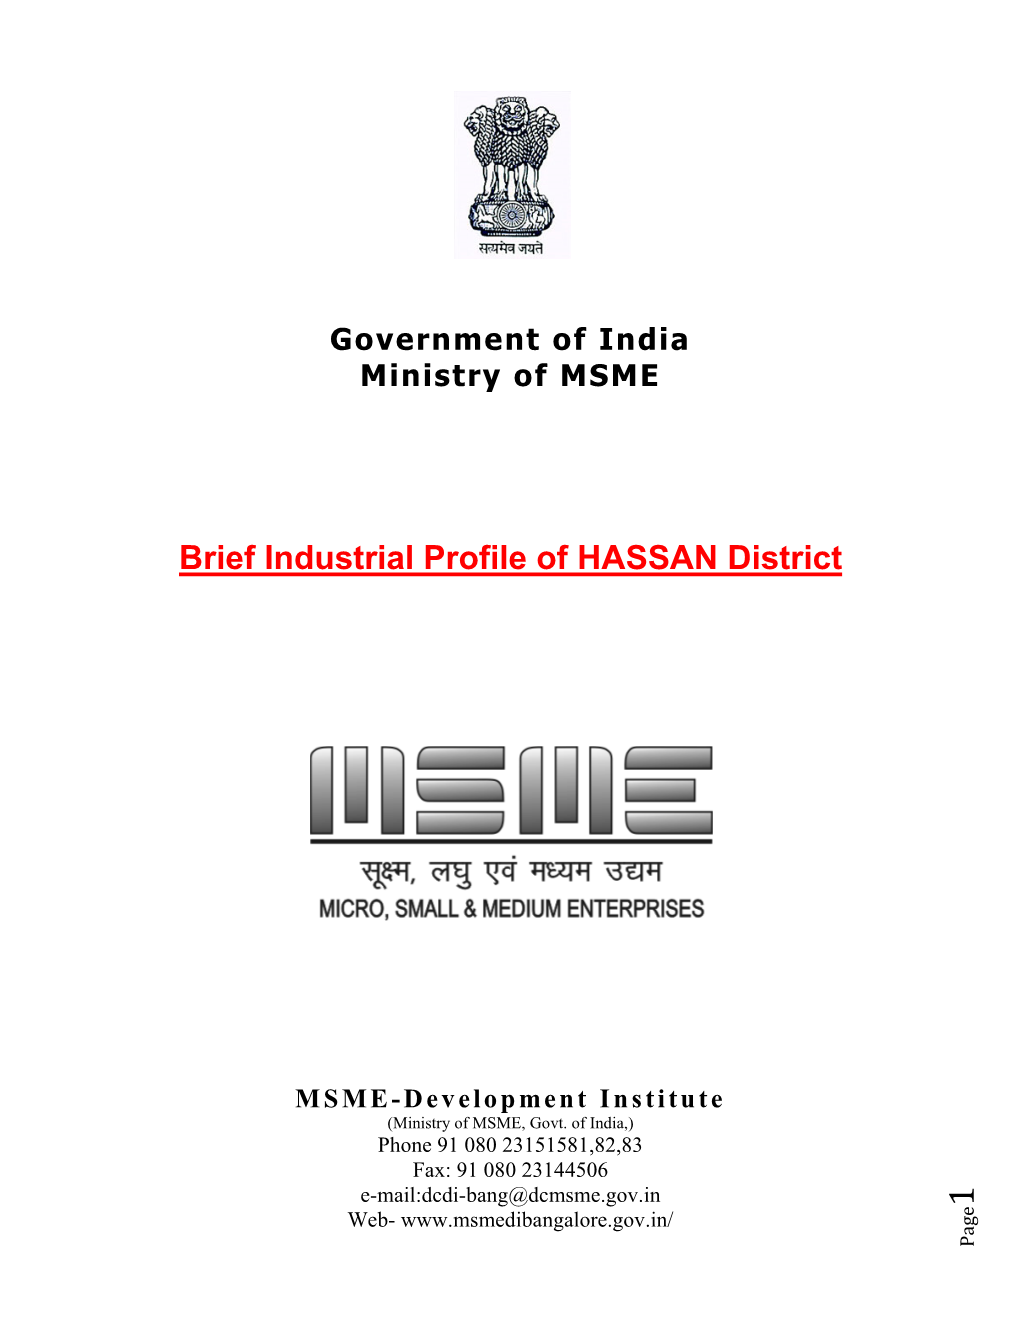 Brief Industrial Profile of HASSAN District